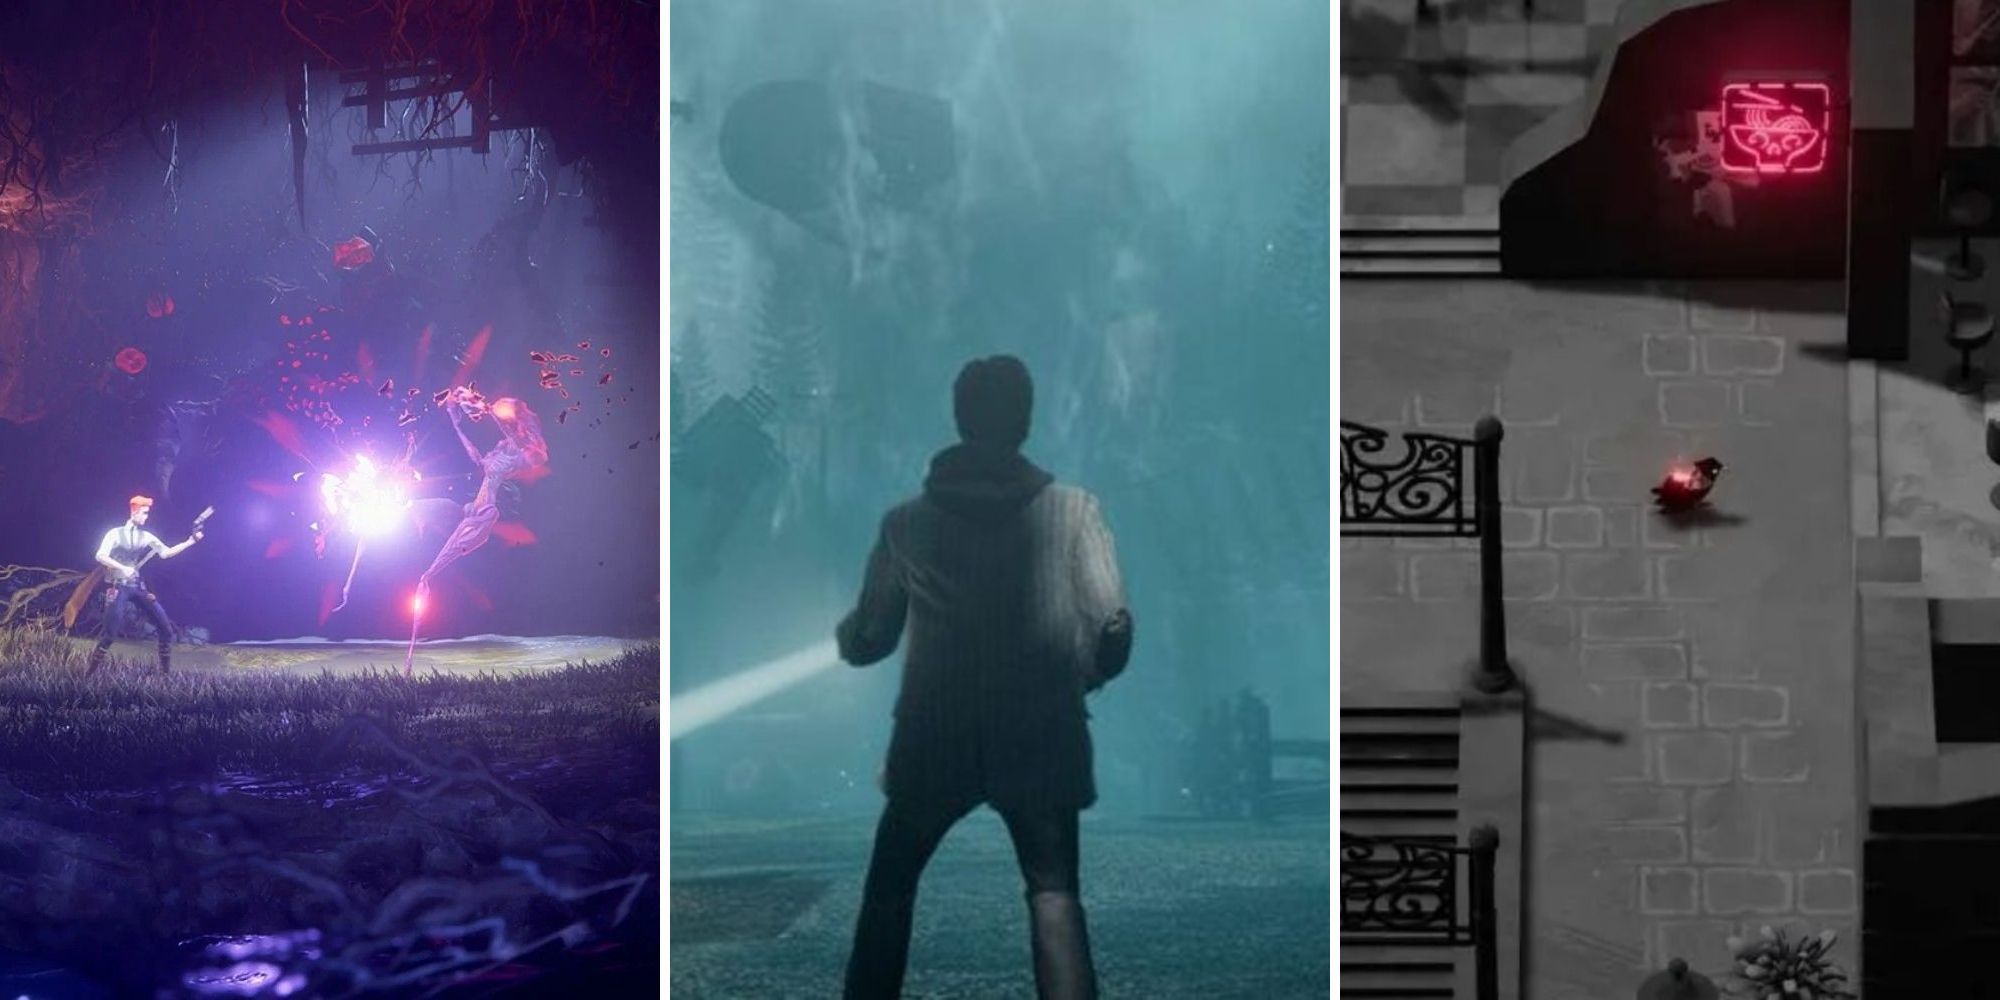 A grid showing the three Creepiest Action-Adventure Games The Last Case of Benedict Fox, Alan Wake, and Death's Door